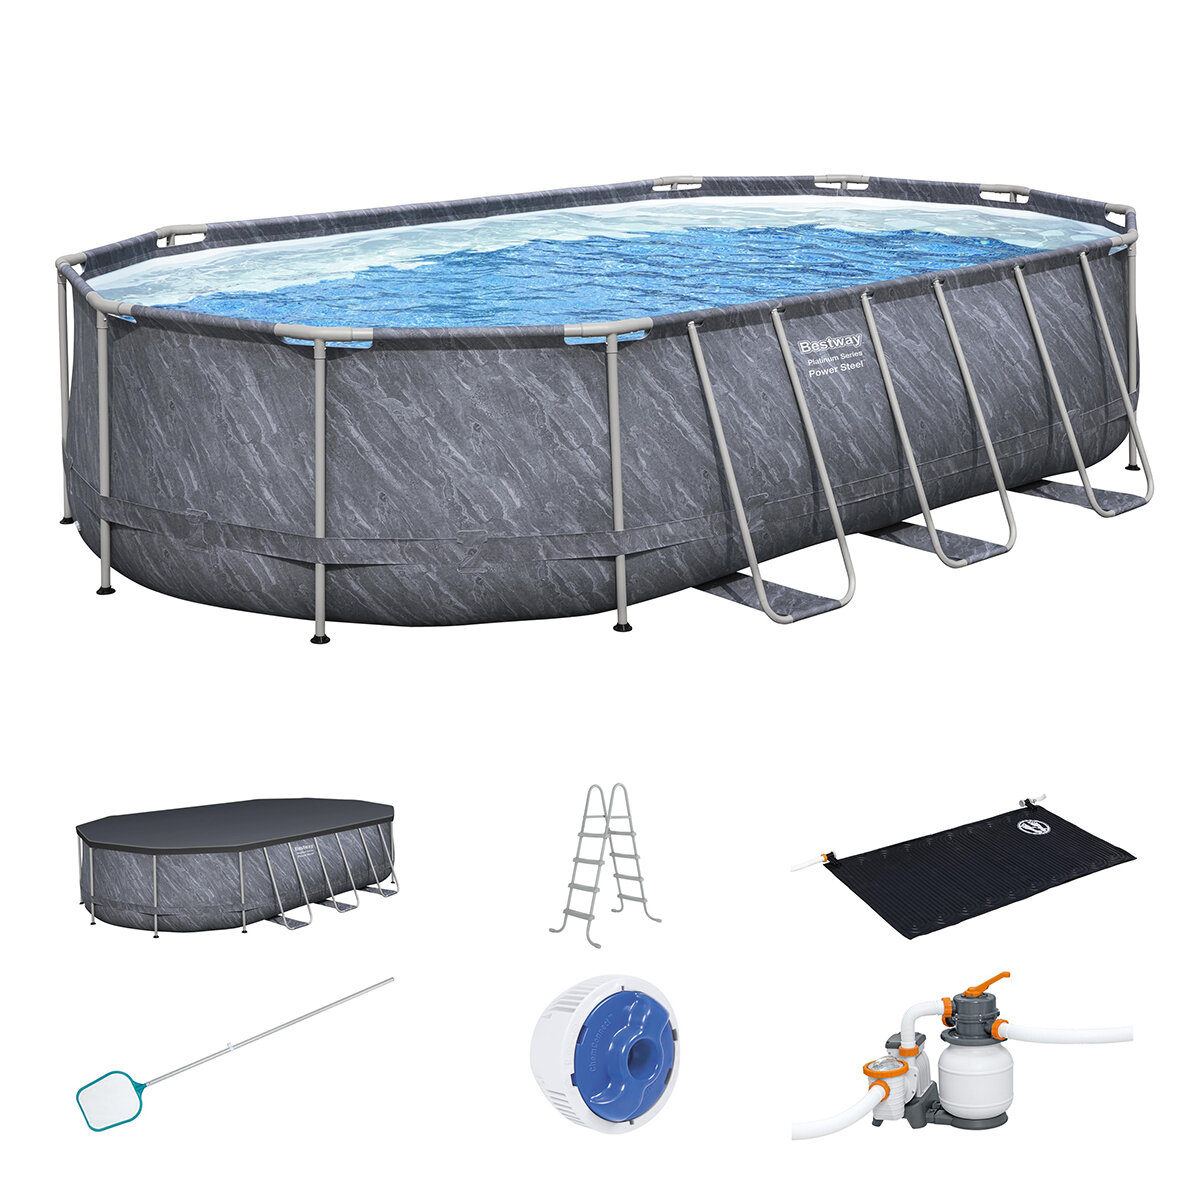 Bestway 20ft x 12ft Platinum Series Power Steel Oval Frame Pool with Sand Filter Pump and Solar Powered Pool Pad 